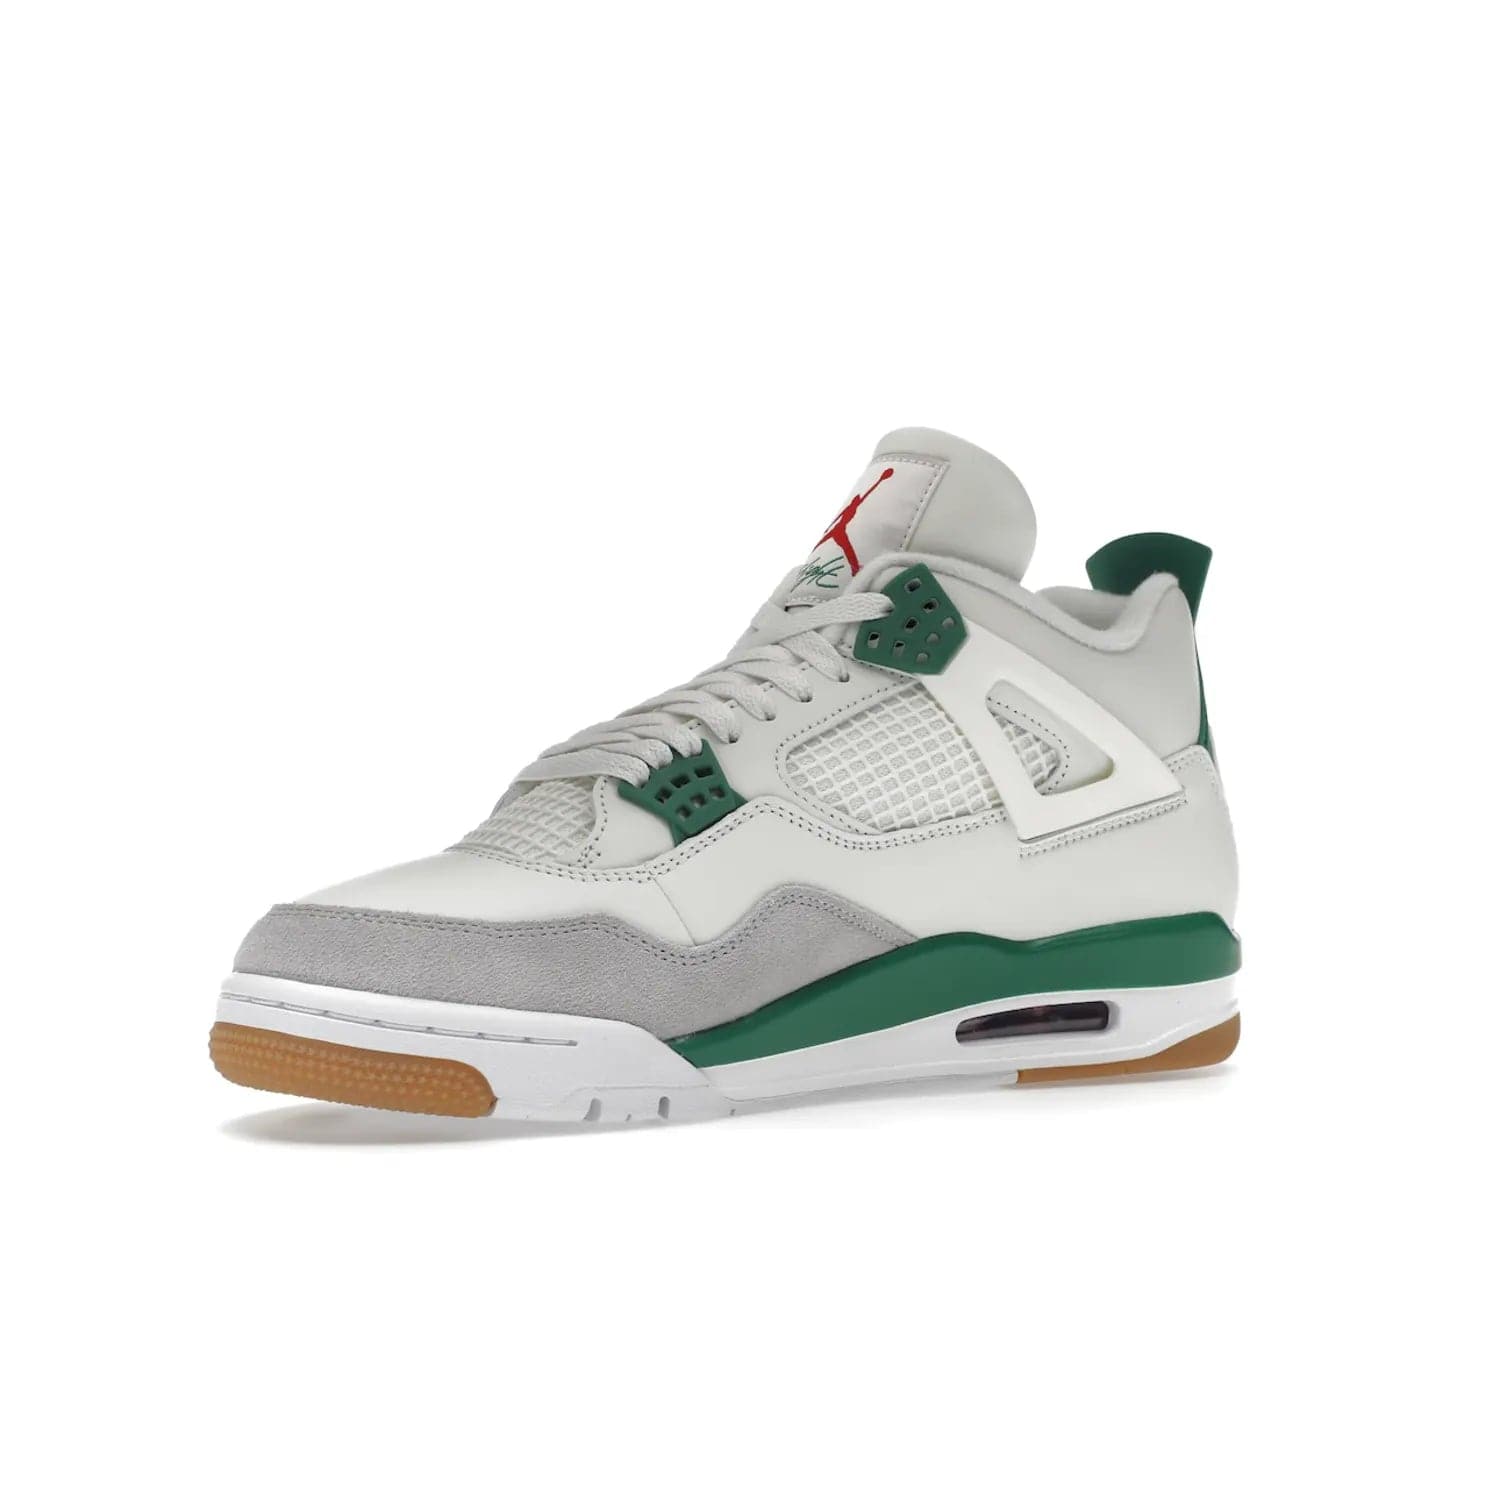 Jordan 4 Retro SB Pine Green - Image 16 - Only at www.BallersClubKickz.com - A white leather upper combined with a Neutral Grey suede mudguard gives this limited Air Jordan 4 Retro SB Pine Green sneaker its unmistakable style. Released March 20, 2023, the Jordan 4 Retro SB features a white and Pine Green midsole plus a red air unit with a gum outsole for grip. The perfect blend of Nike SB skateboarding and Jordan 4 classic design.